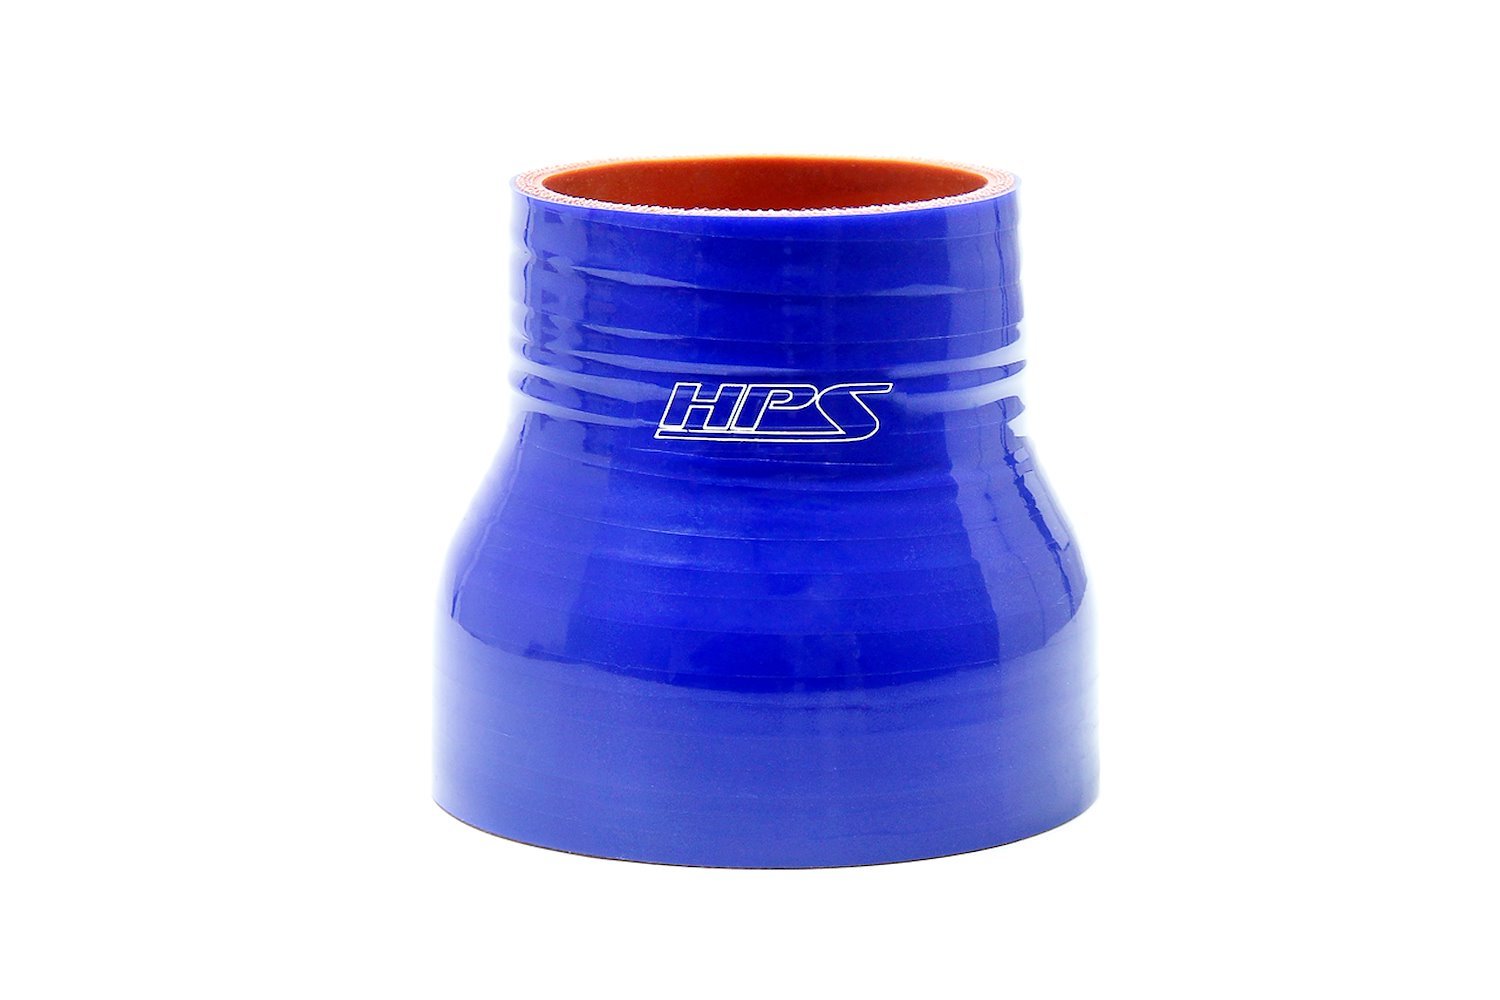 HTSR-150-175-BLUE Silicone Reducer Hose, High-Temp 4-Ply Reinforced, 1-1/2 in. - 1-3/4 in. ID, 3 in. Long, Blue